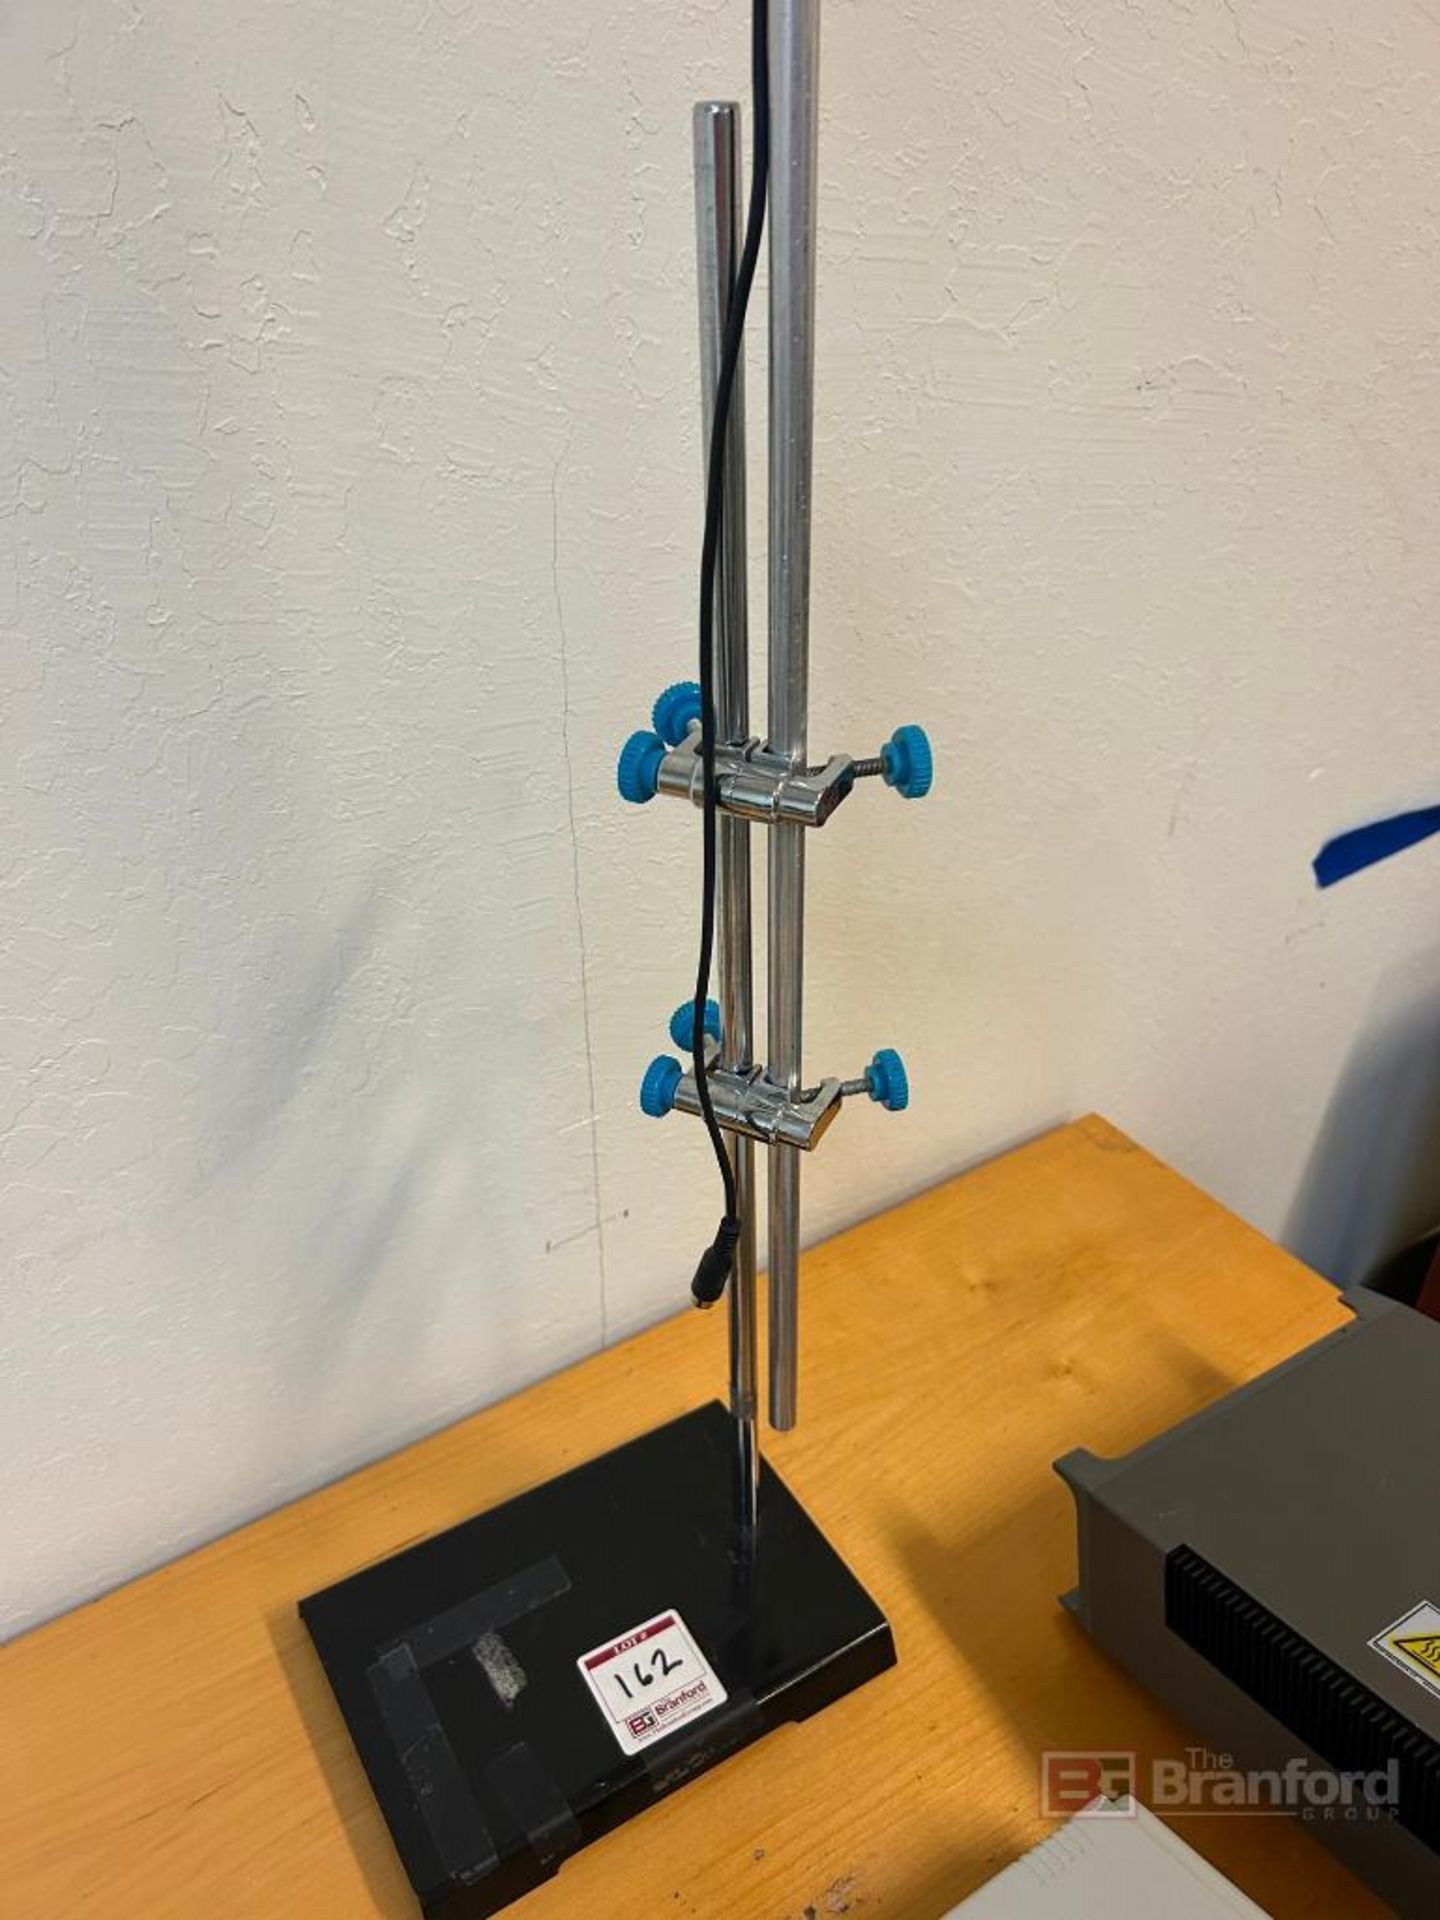 Adjustable Height Light Stand - Image 2 of 3